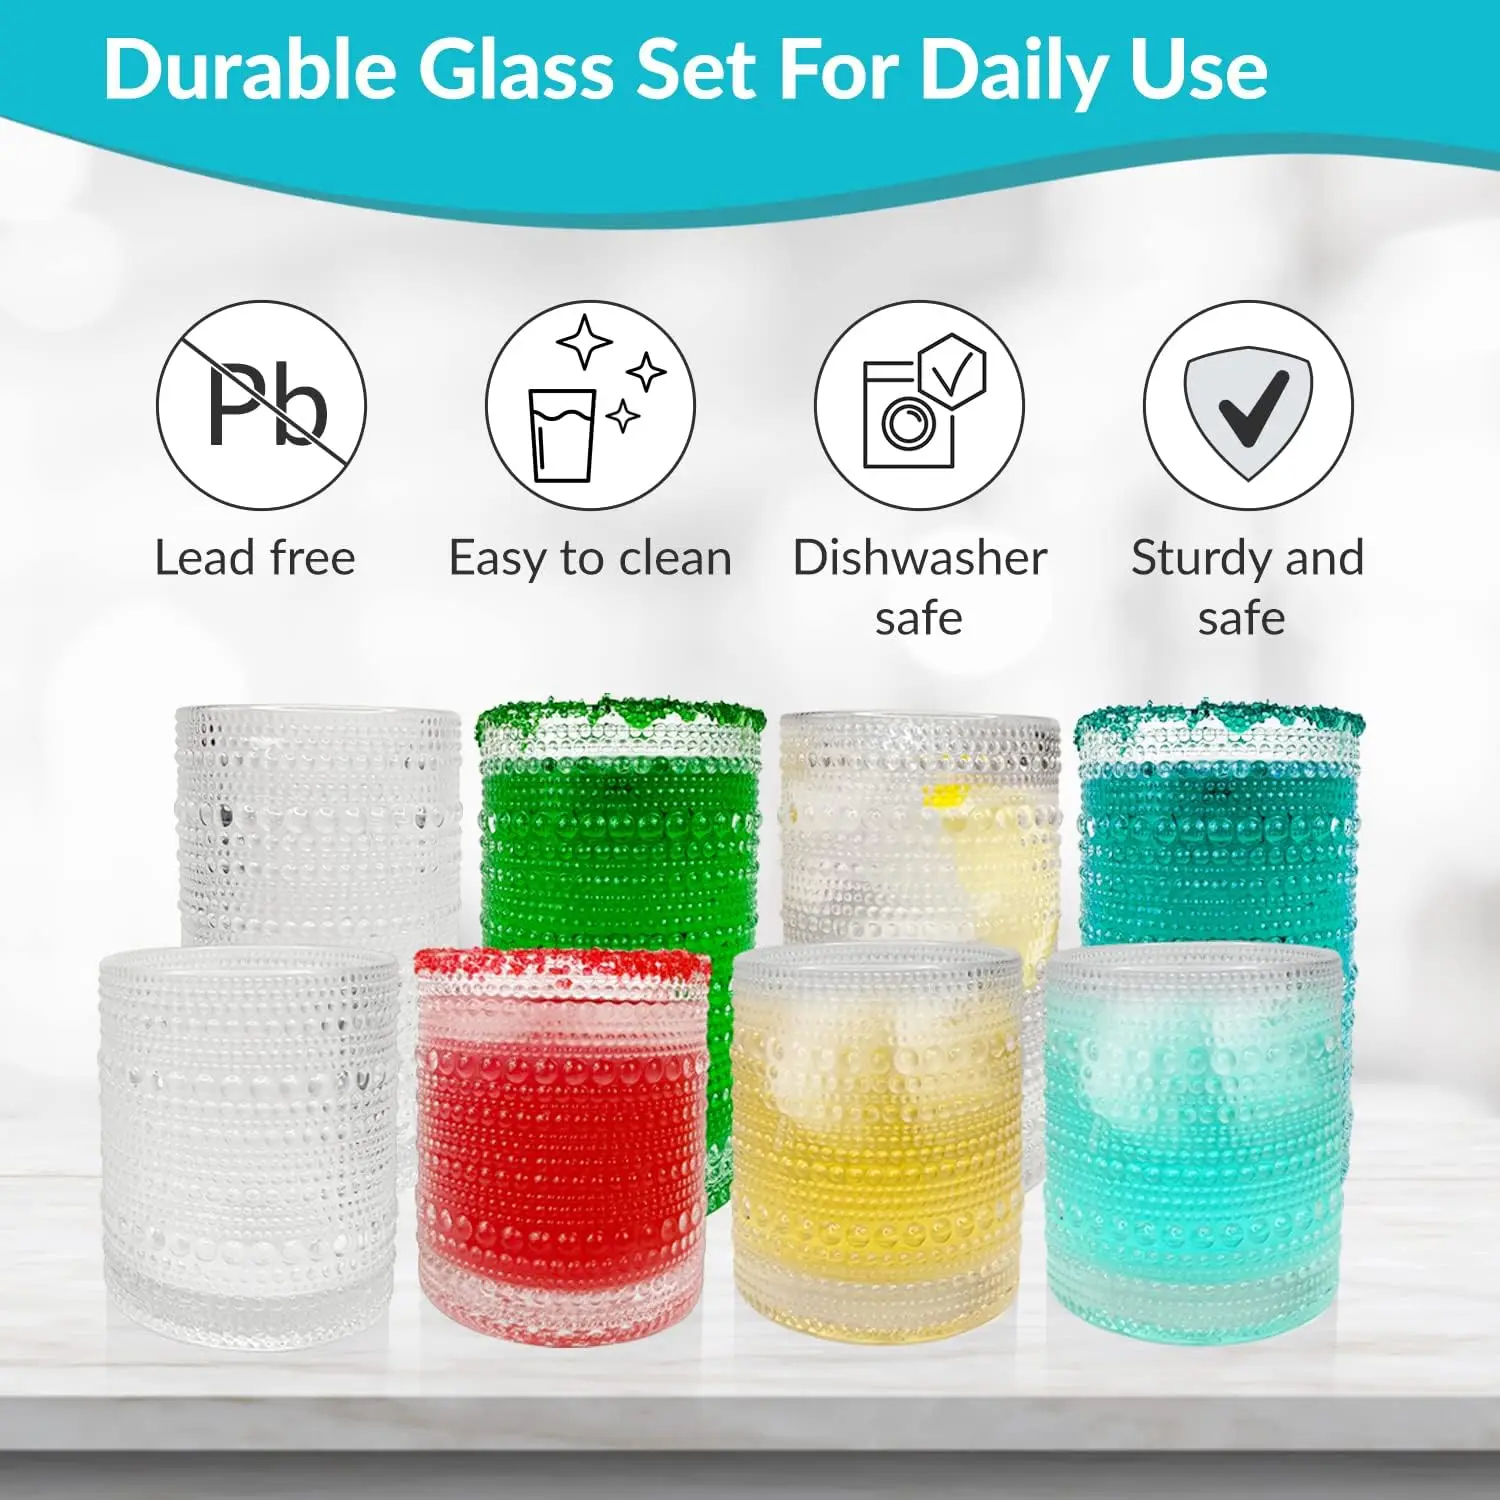 4-Piece Vintage Glassware Drinking Glasses Set with Old Fashioned Glass for  Water,Beer,Soda,Beverages, Dishwasher Safe - AliExpress